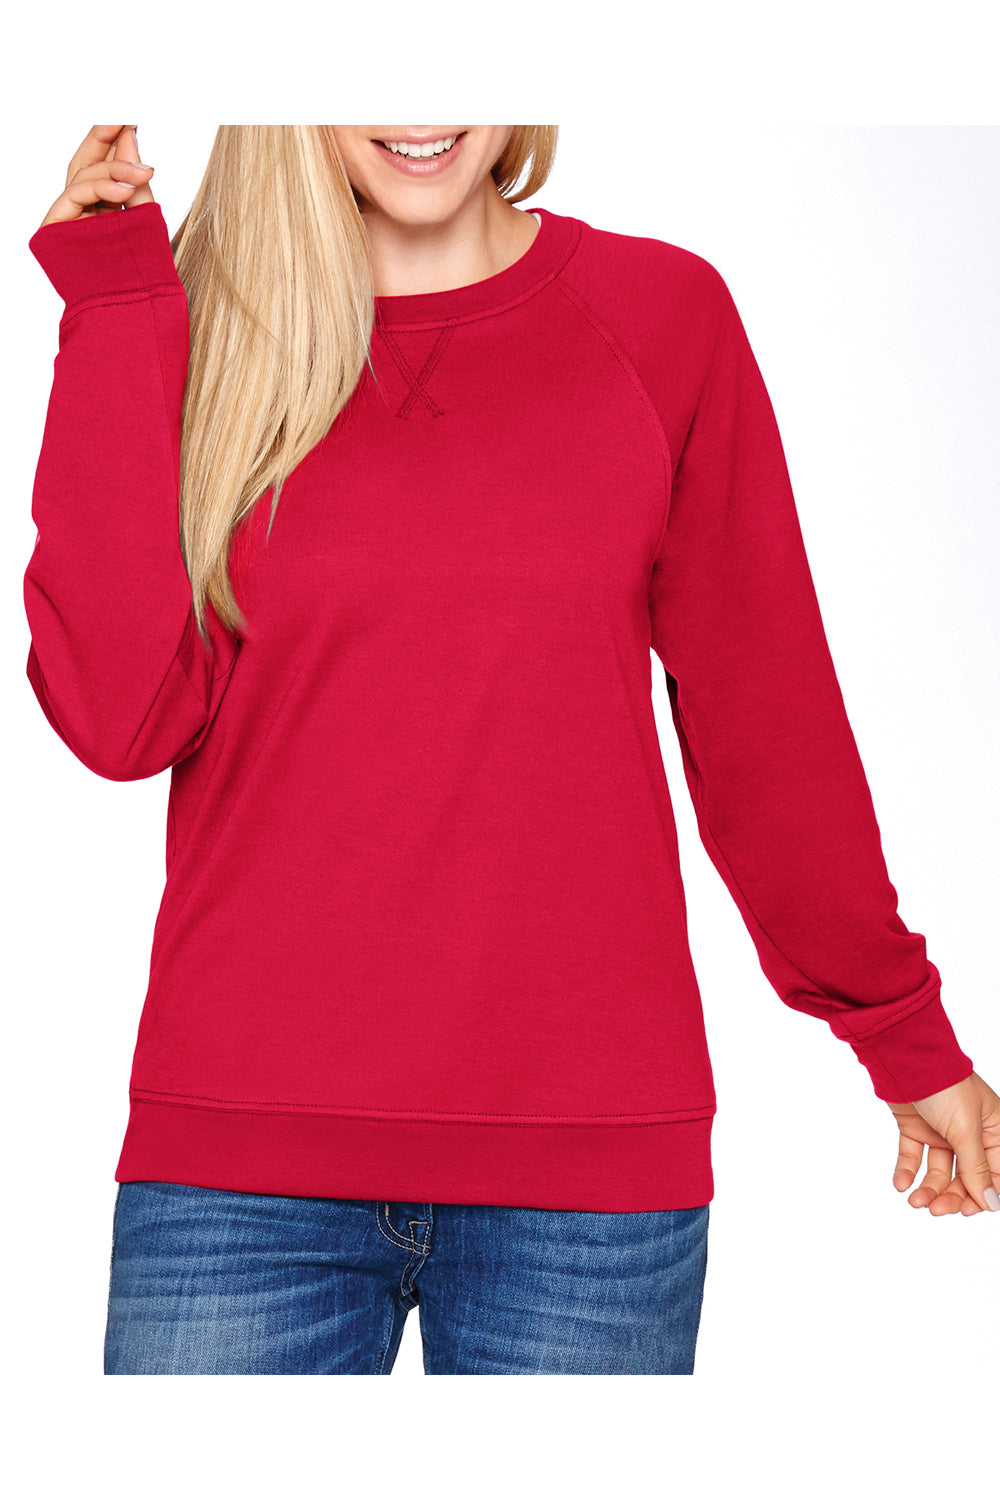 Next Level N9000 Mens French Terry Long Sleeve Crewneck T-Shirt Red Front